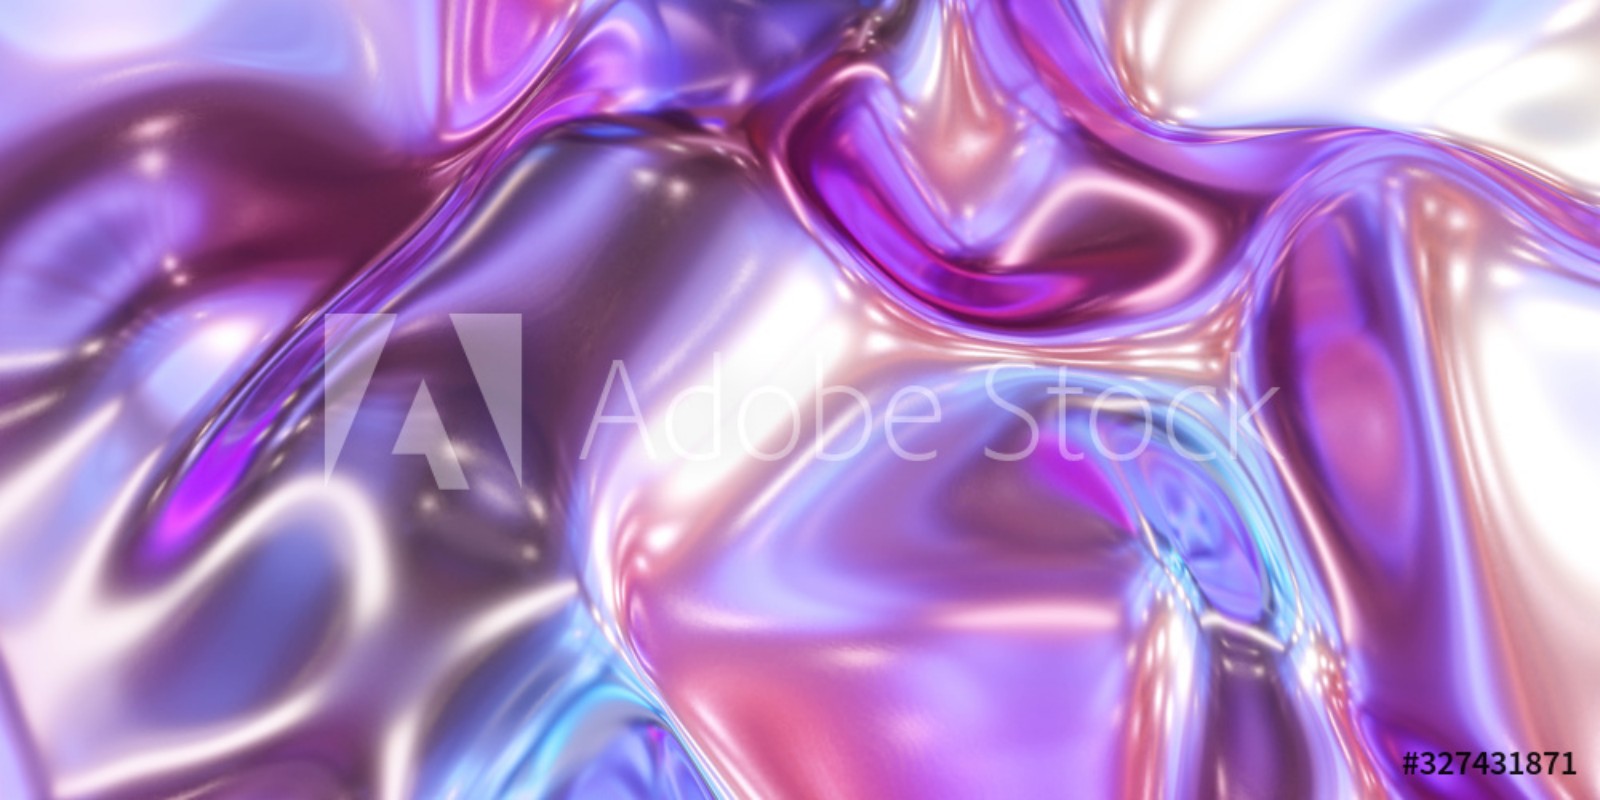 Image de Glossy metal neon pink and blue fluid glossy mirror water effect background backdrop texture 3d render illustration